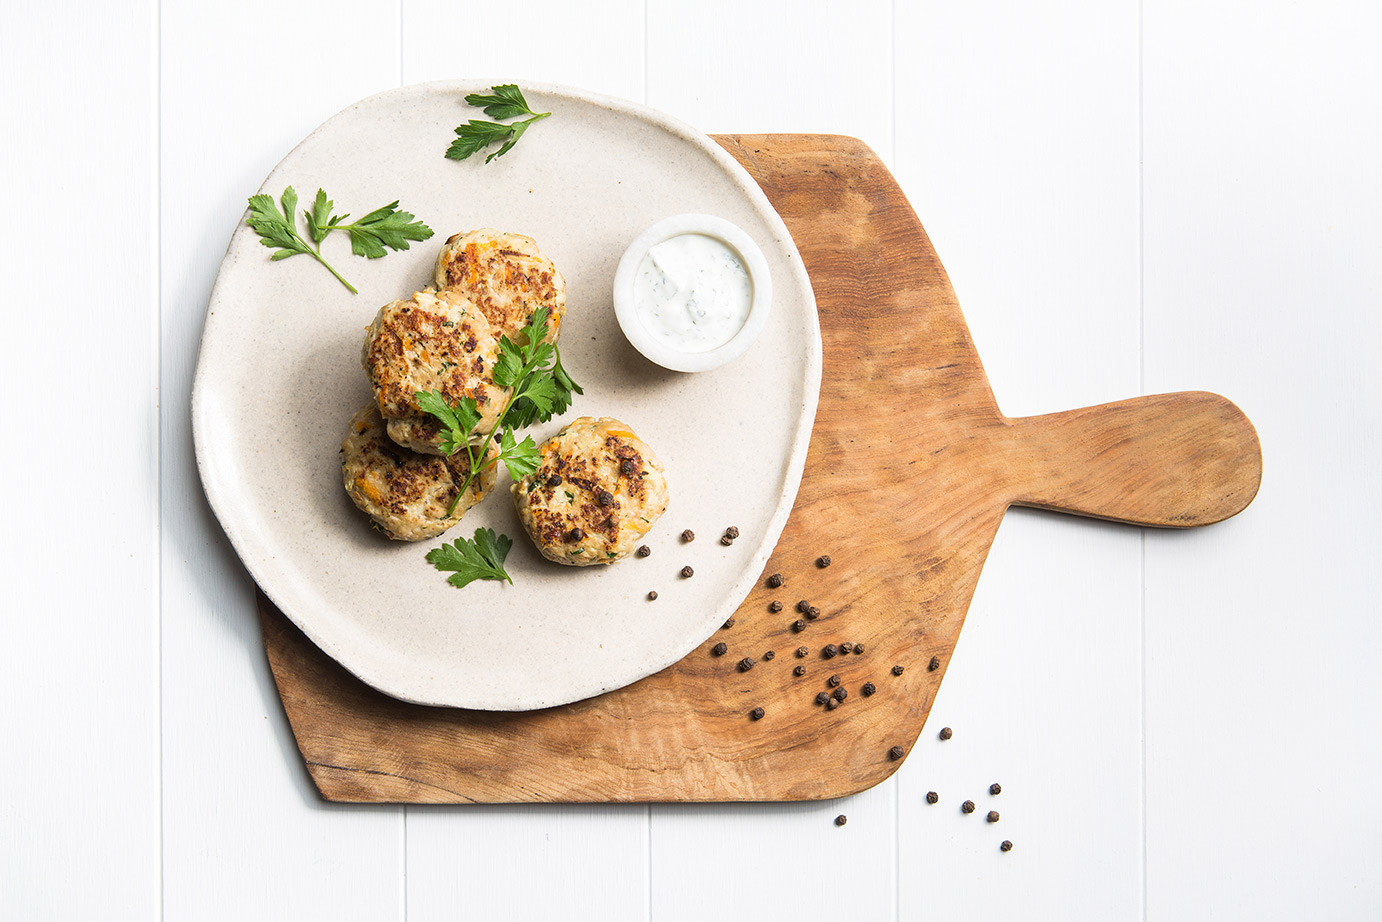 Image of four pork and apple Rissoles on a large stone plate served on a wooden cutting board with parsley, cracked paper and a small dish of dipping sauce on the side